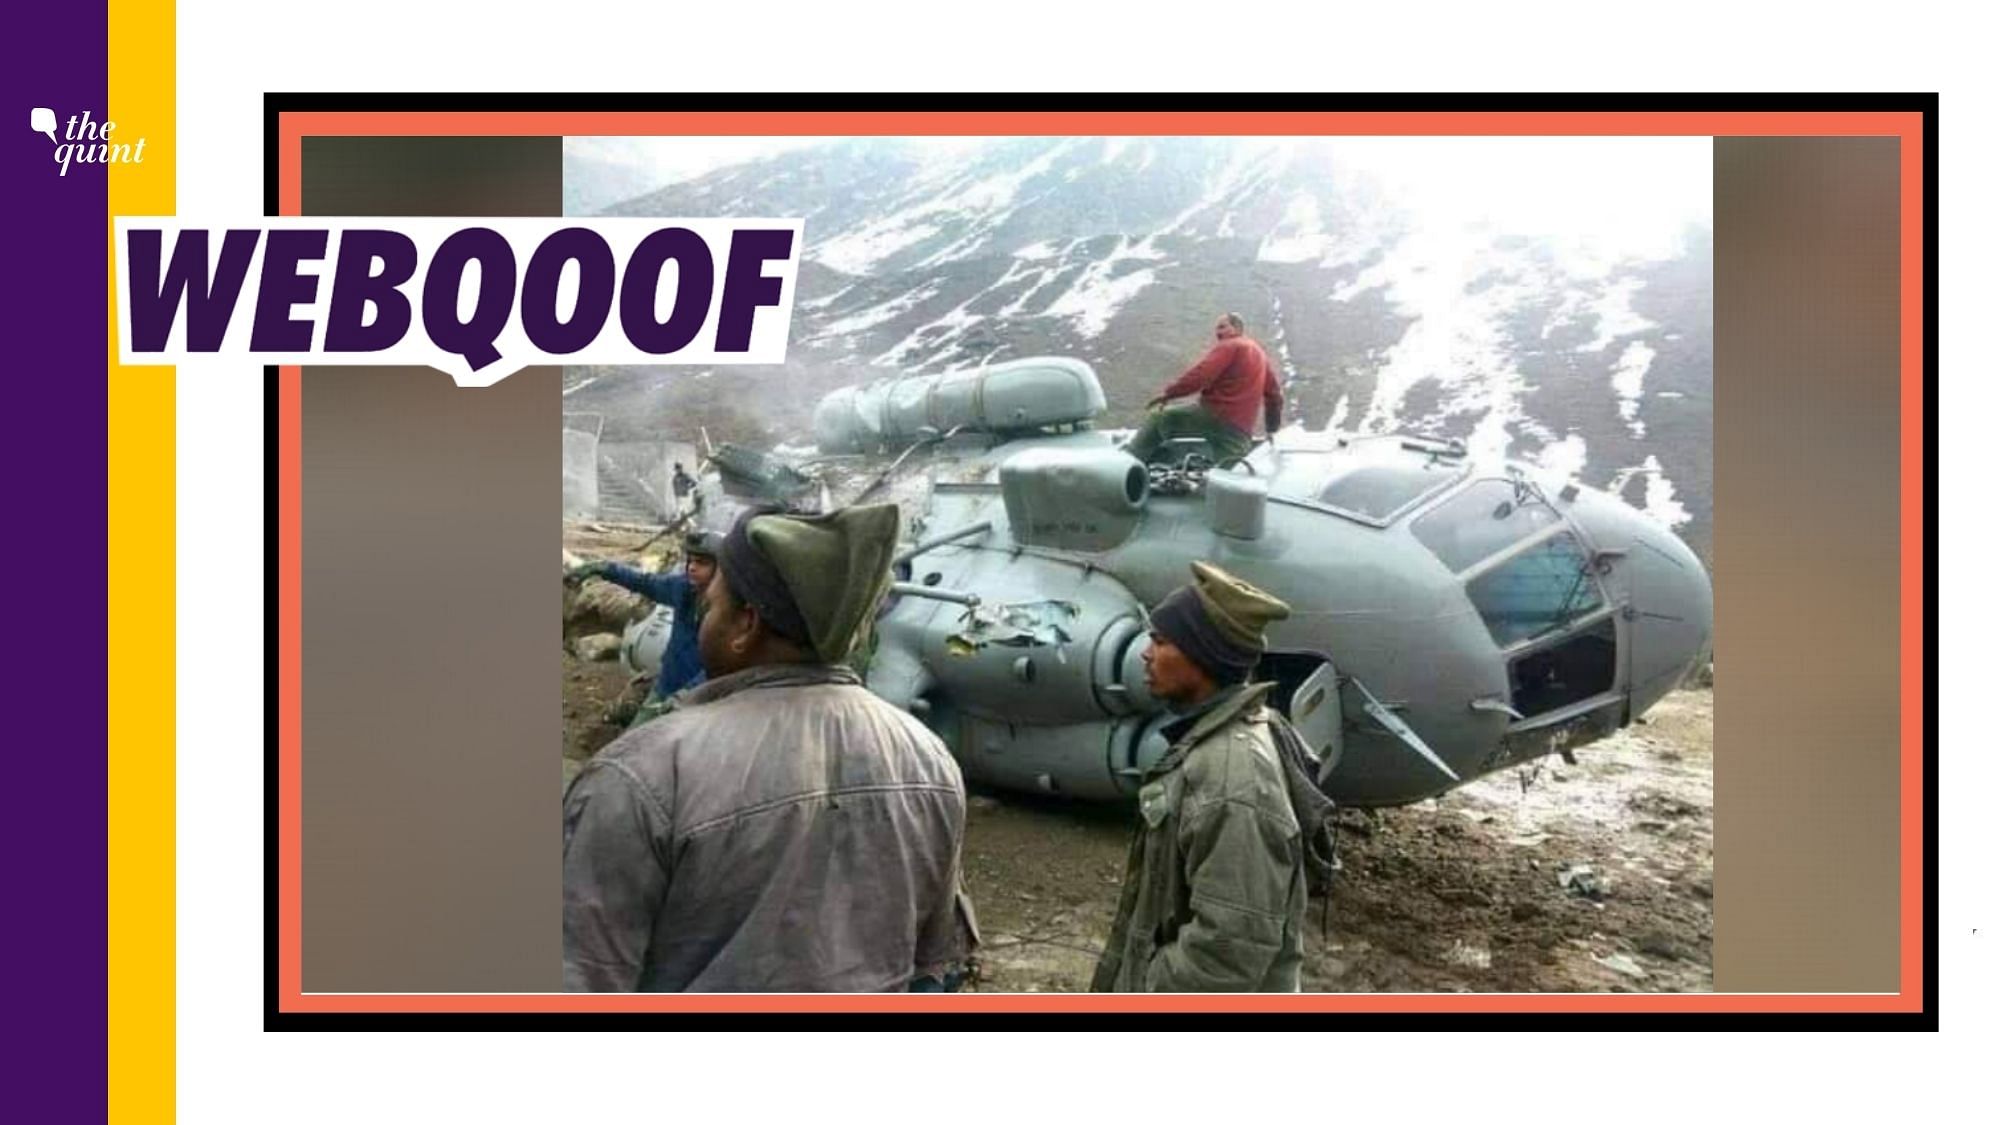 Old image from a crash that took place in Uttarakhand has resurfaced with the false claim that it took place in Ladakh recently.